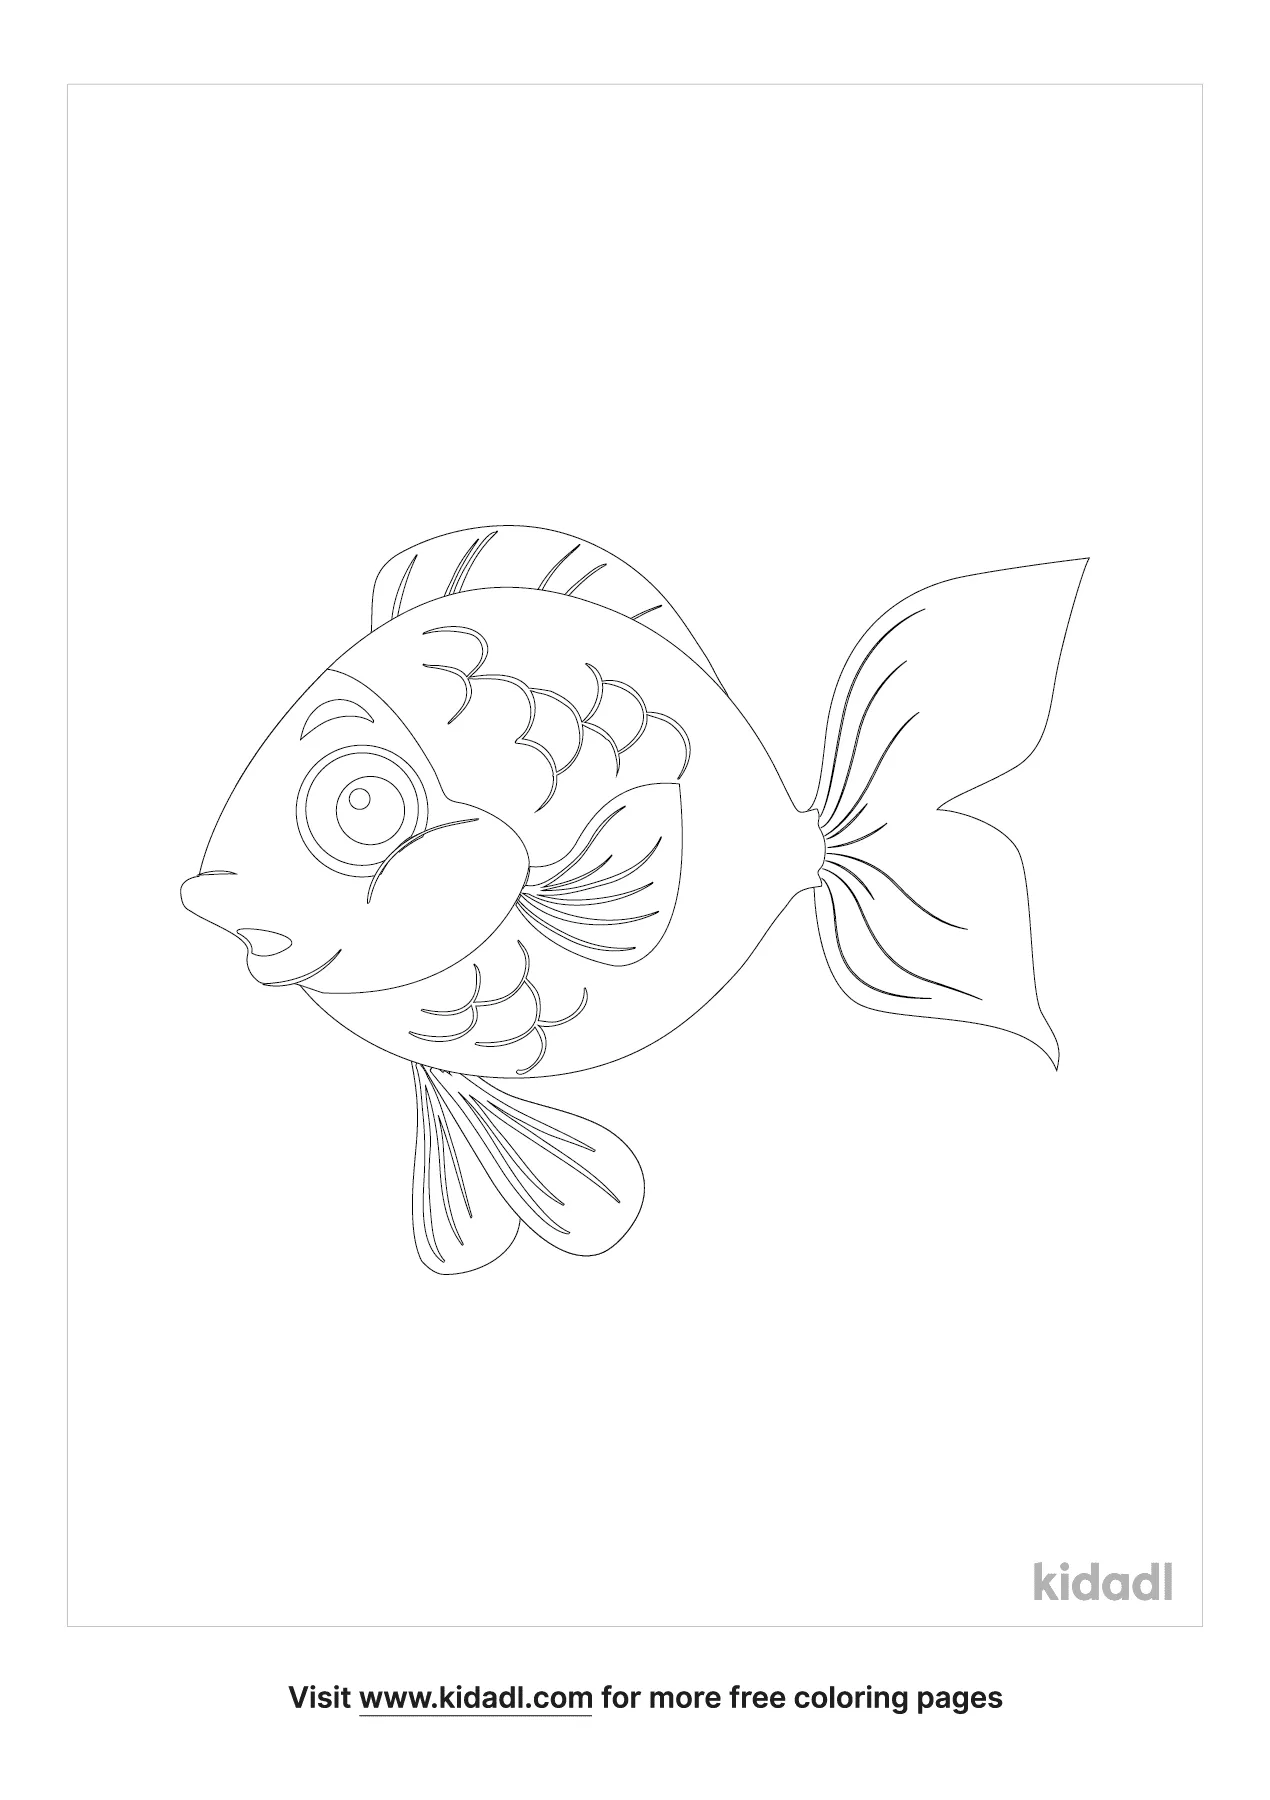 Easy Fish For Kids Coloring Page